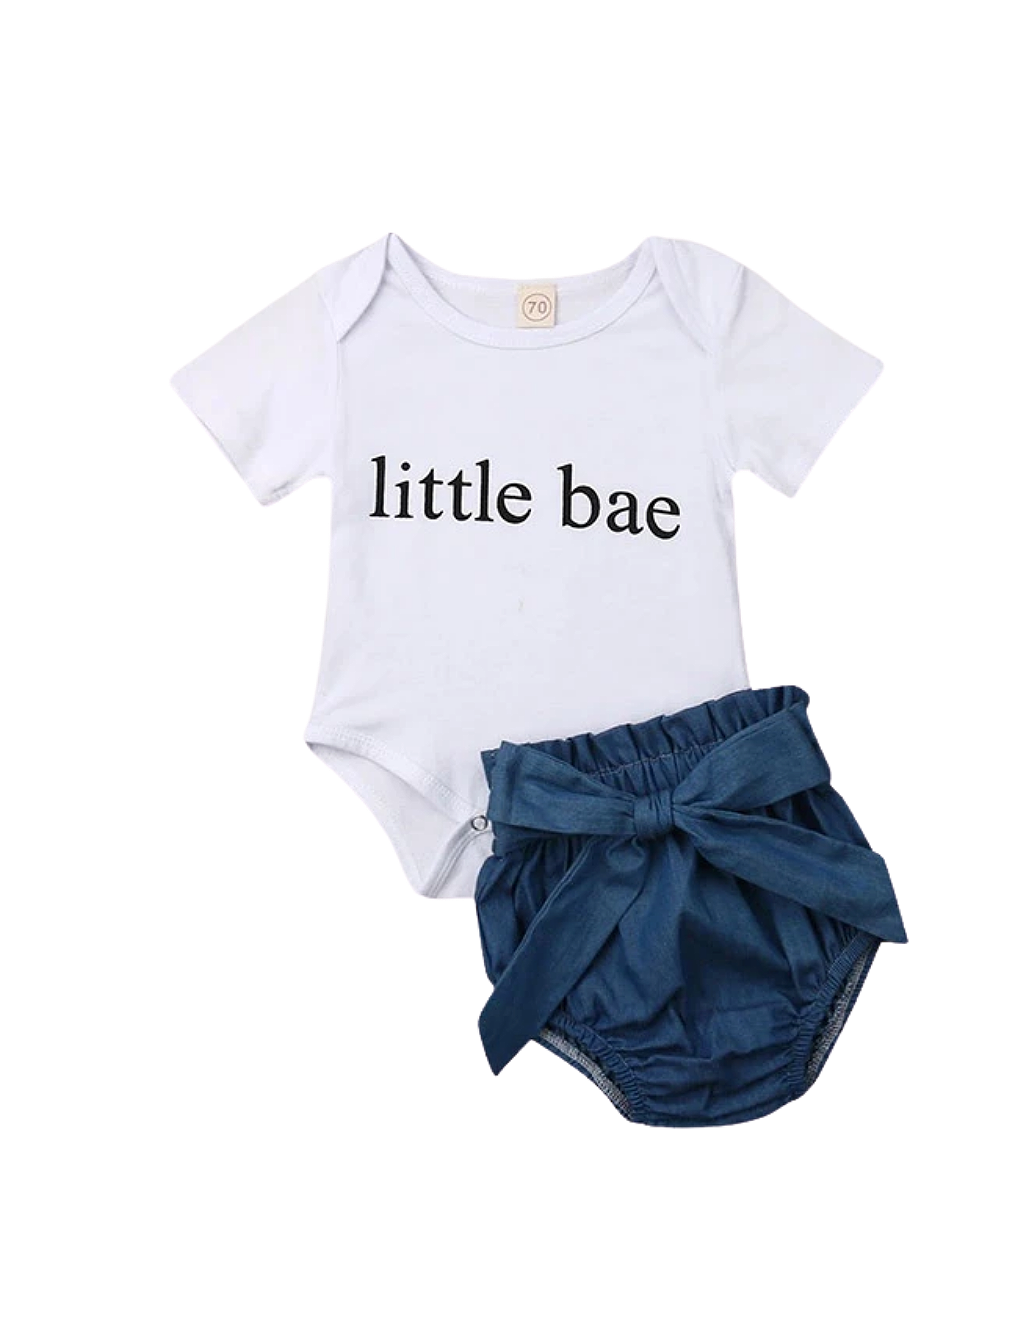 "Little Bae" Outfit - RTS